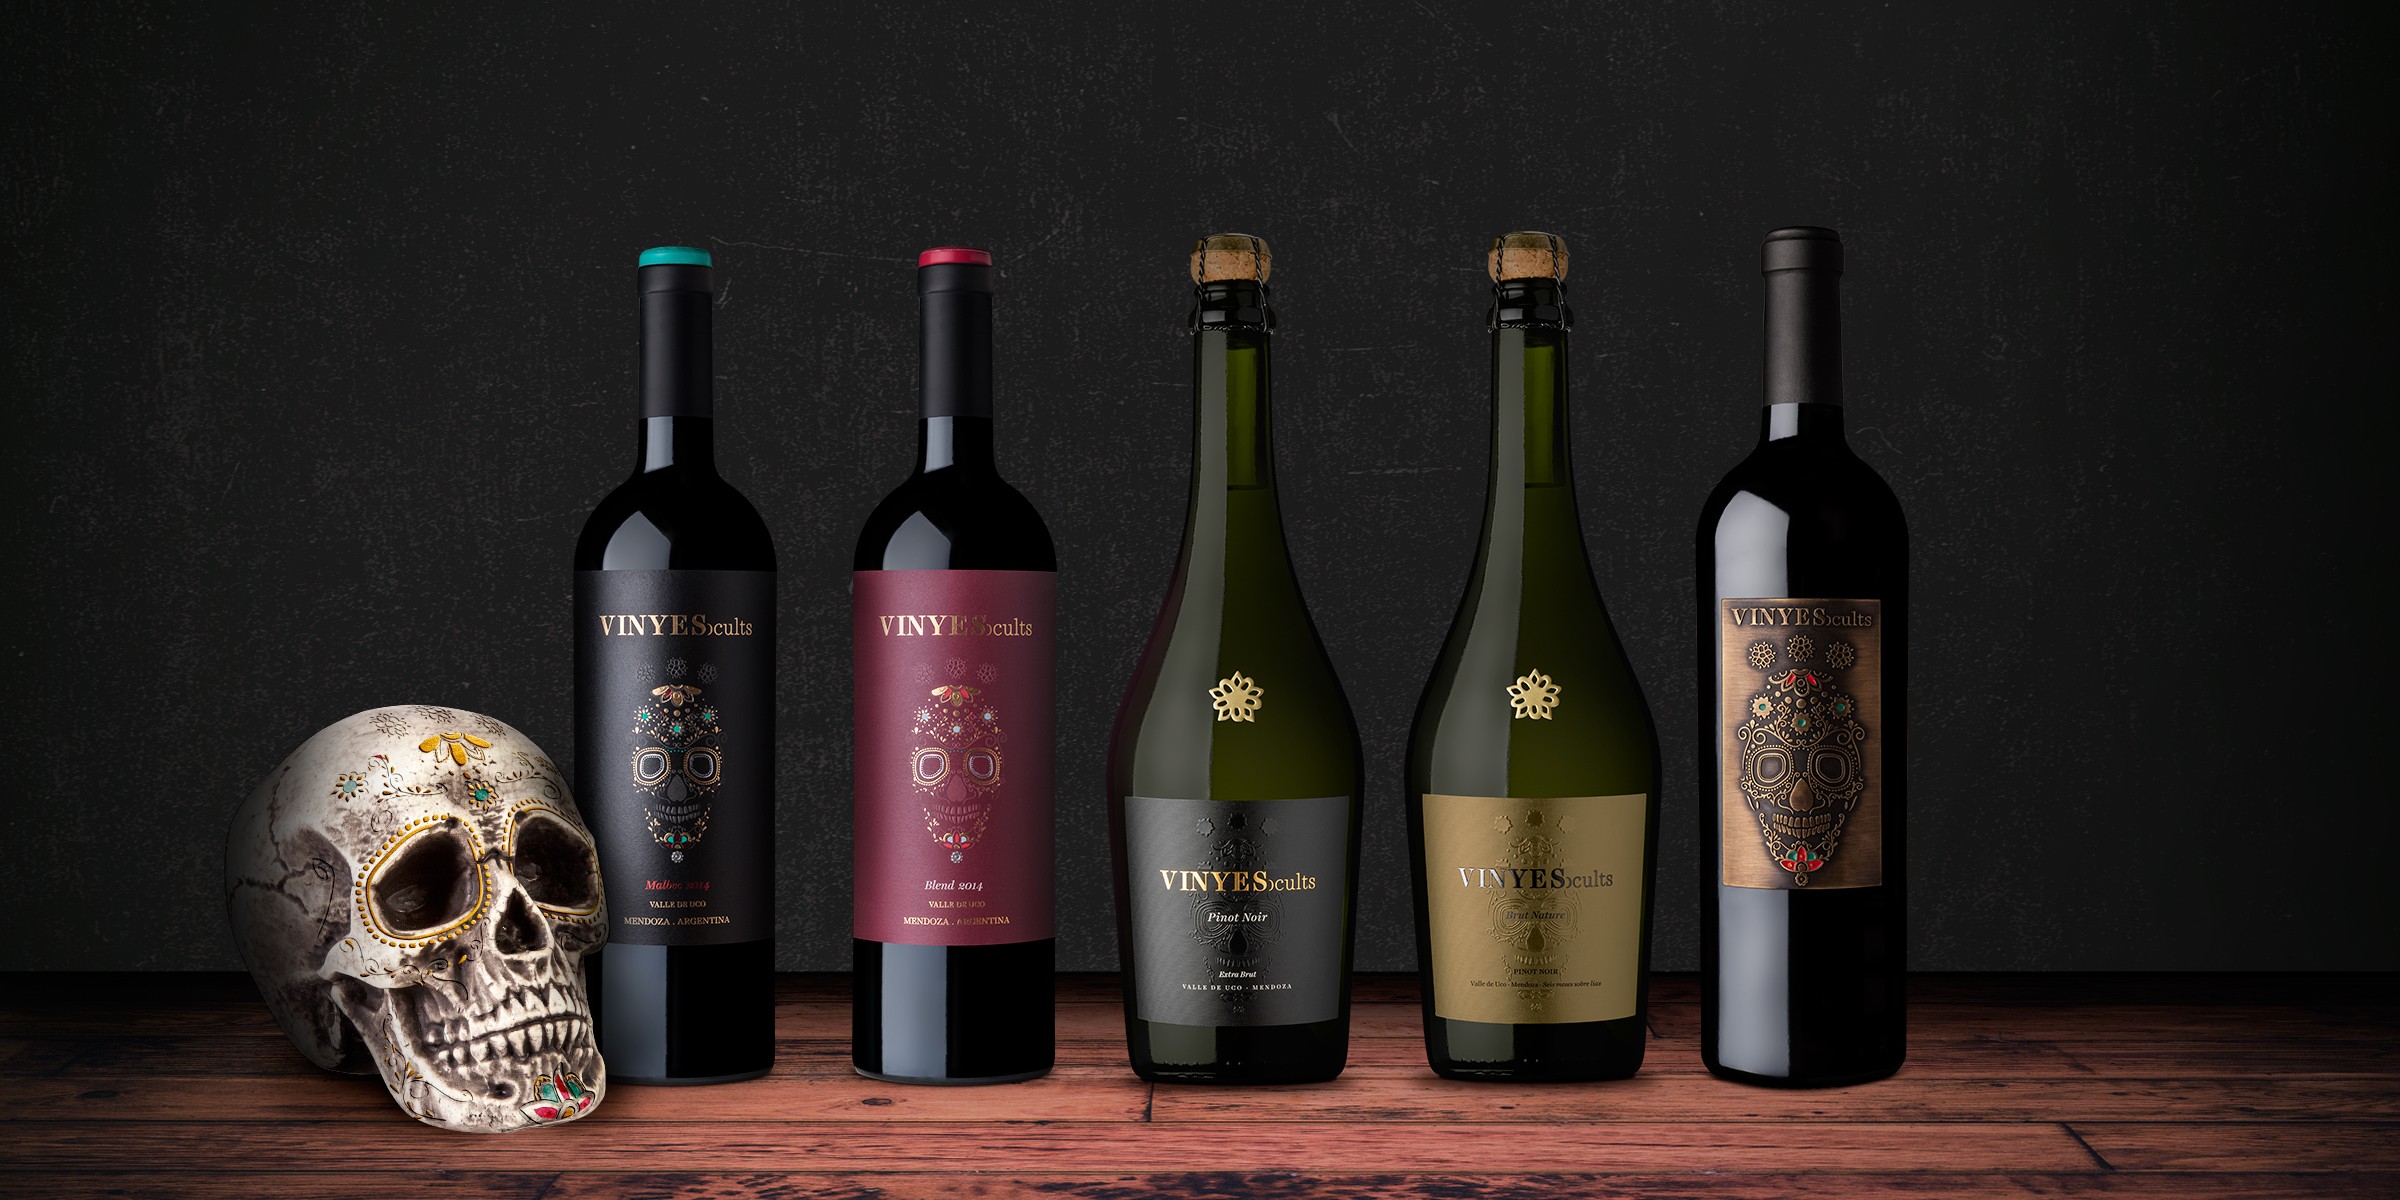 Catalan and Mexican Design Influence for Wine Family